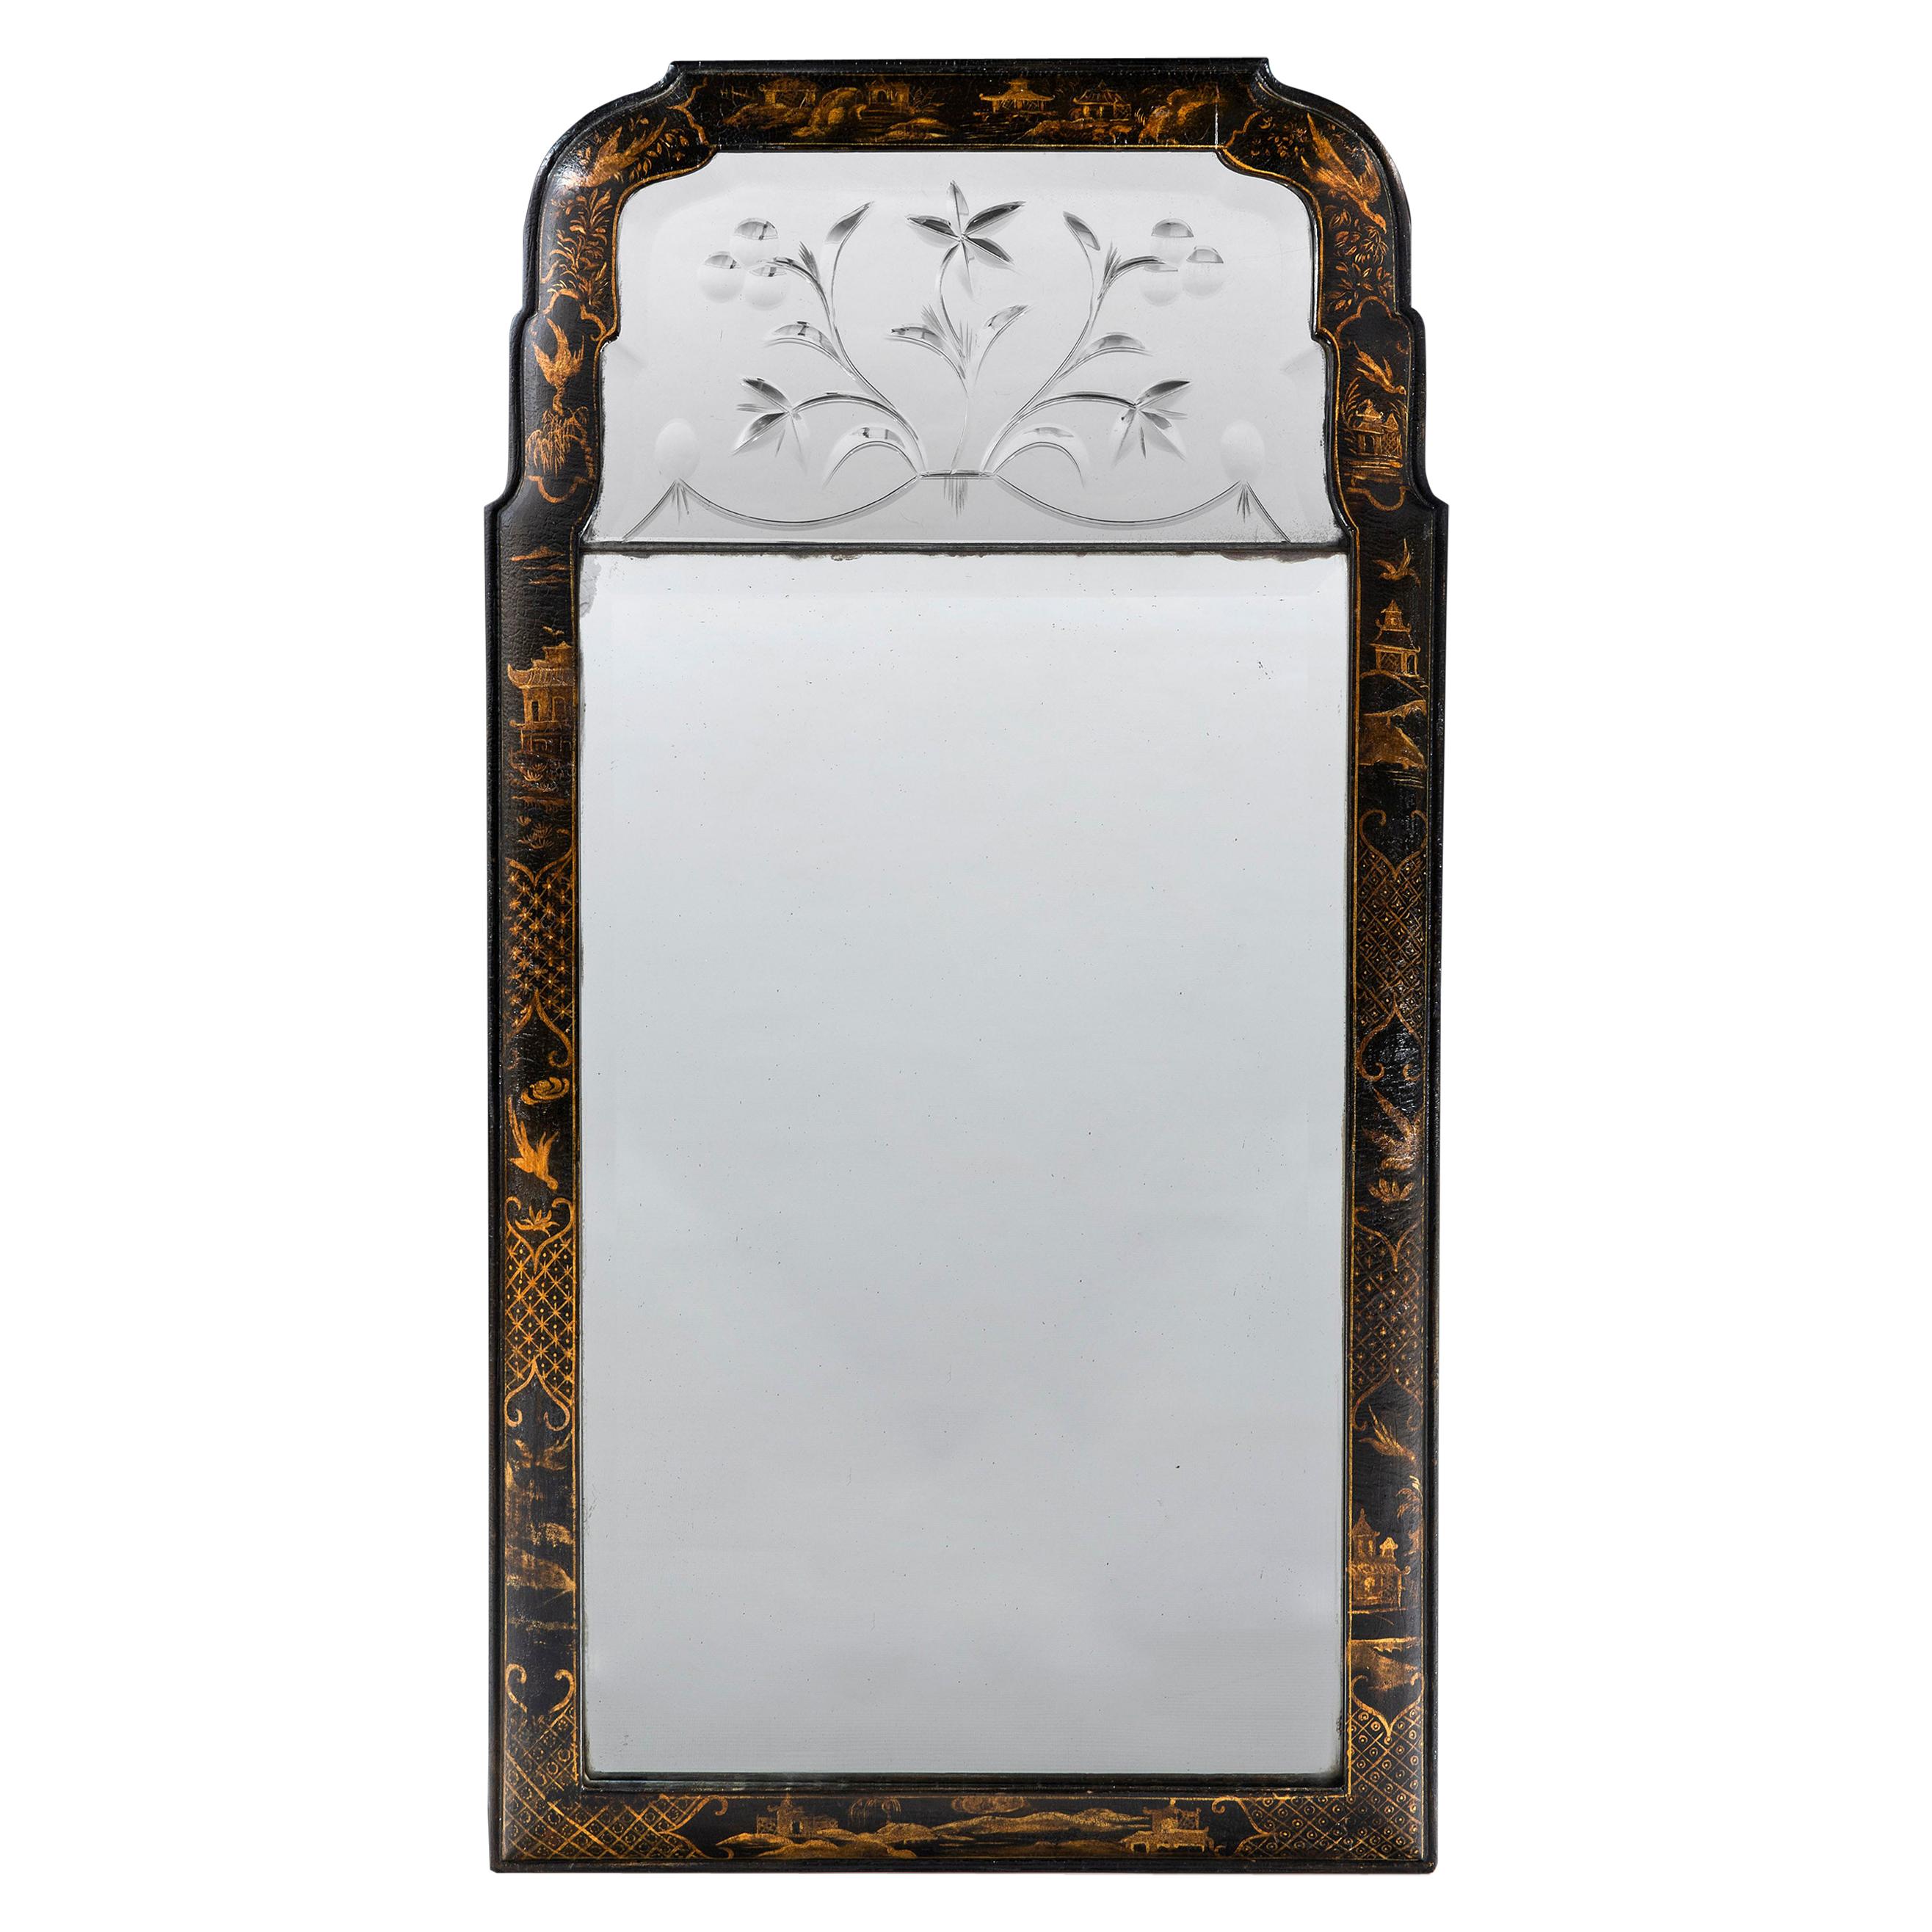 Early 19th Century Regency Period Chinoiserie Mirror with Original Etched Plate For Sale